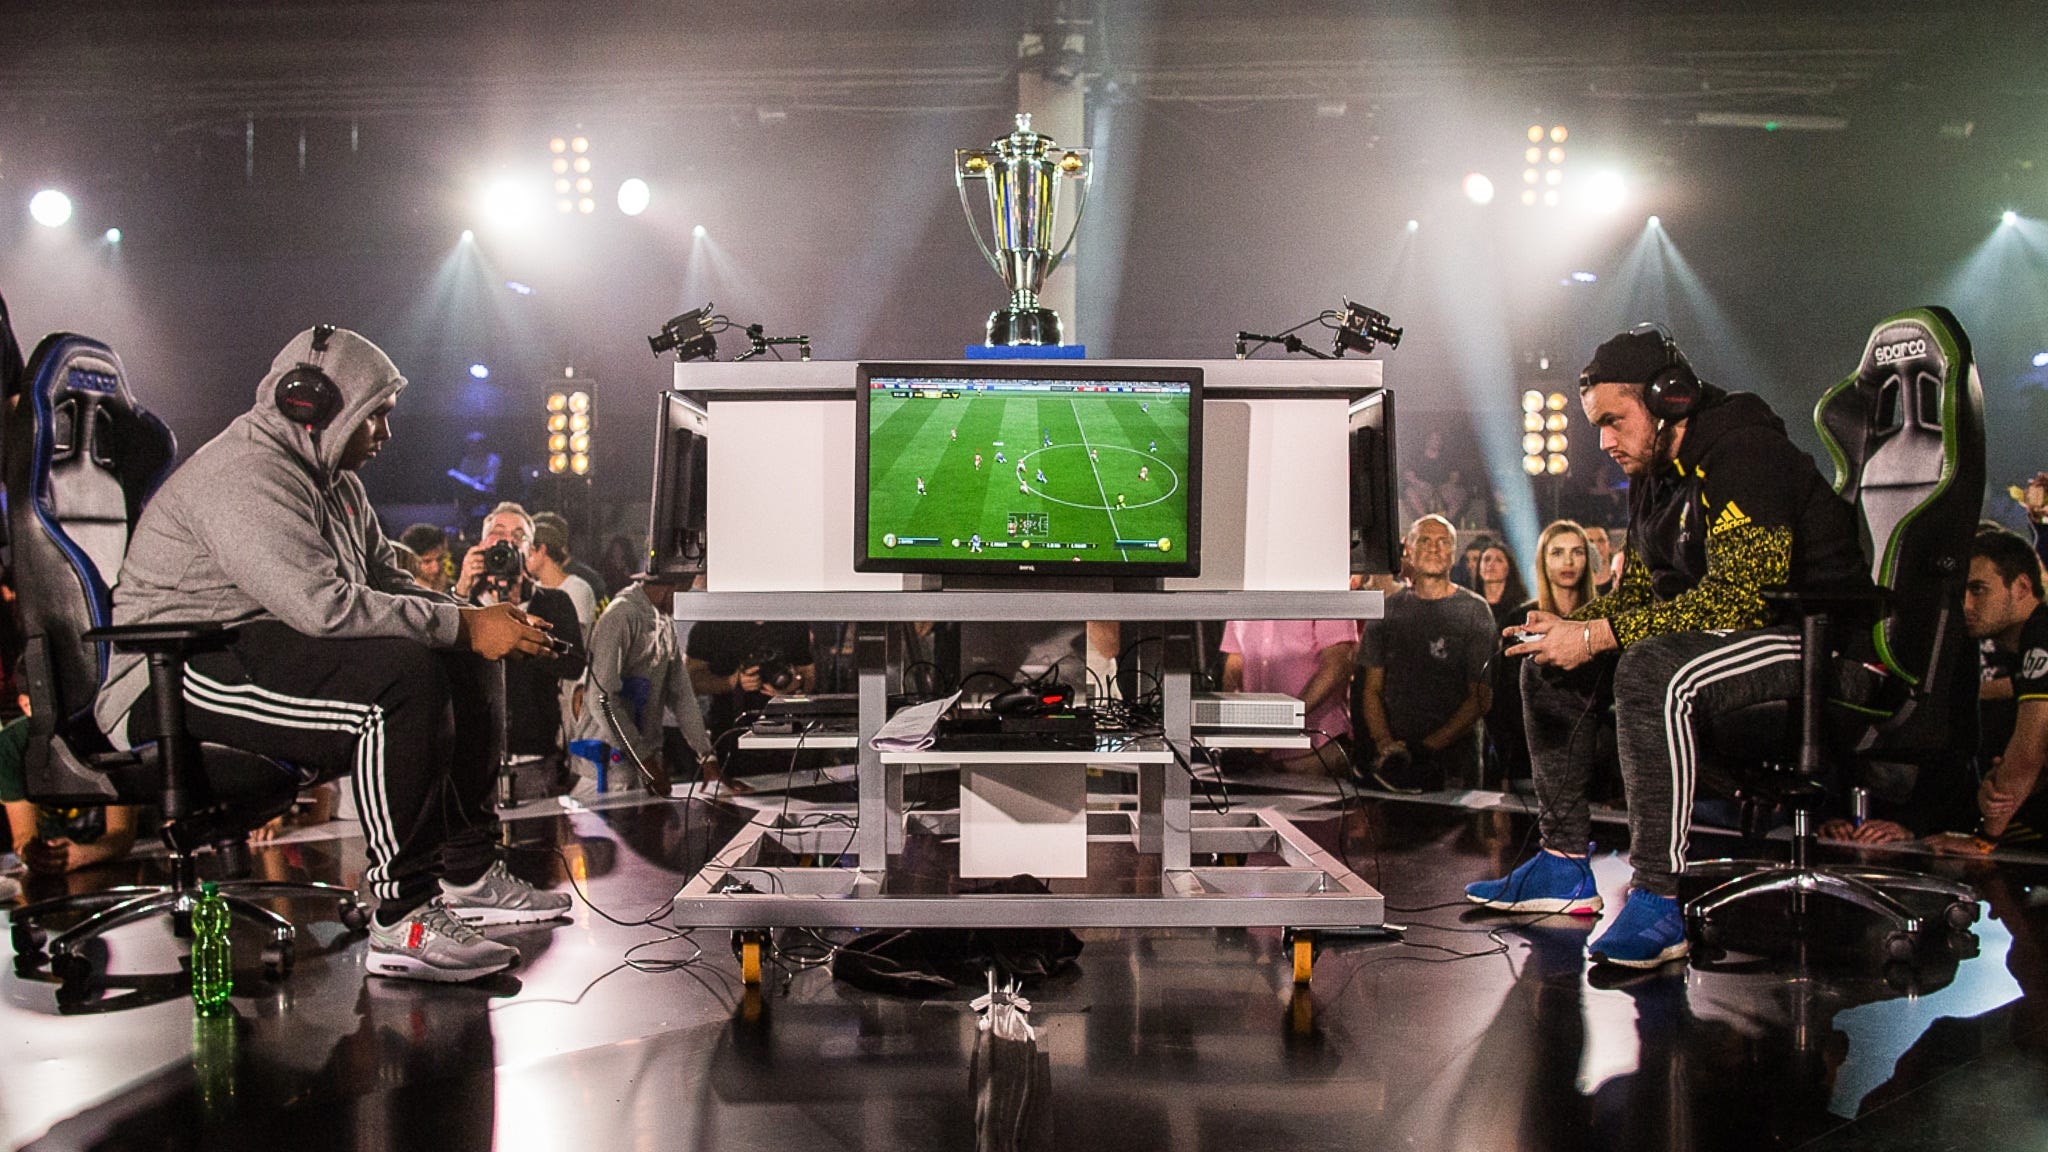 Two gamers facing off during Electronic Arts' FIFA Championship esports event